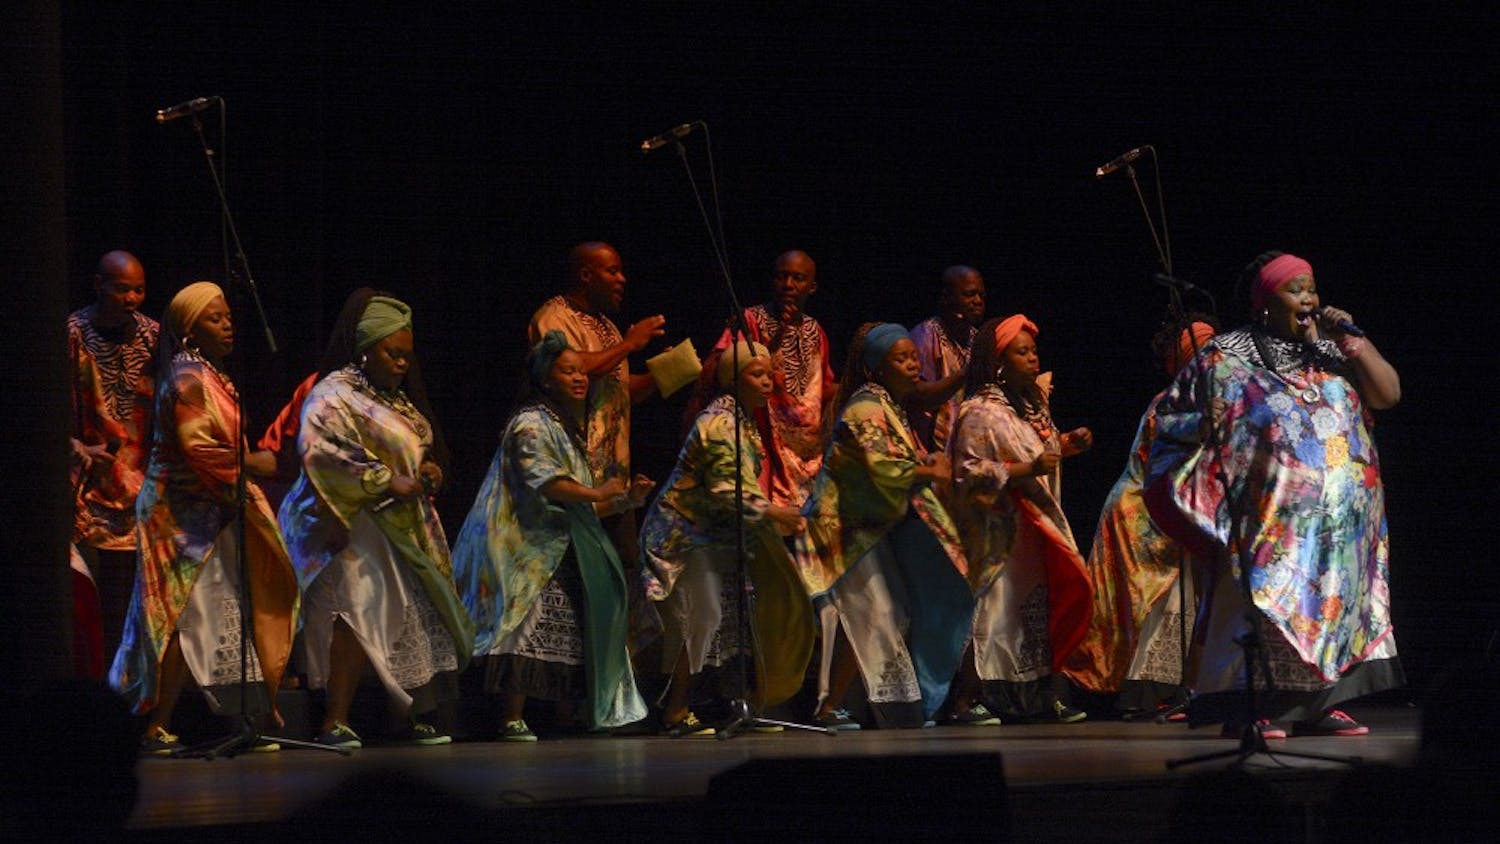 The Soweto Gospel Choir, known as the voice of South Africa, performs at IU Auditorium on Friday evening.